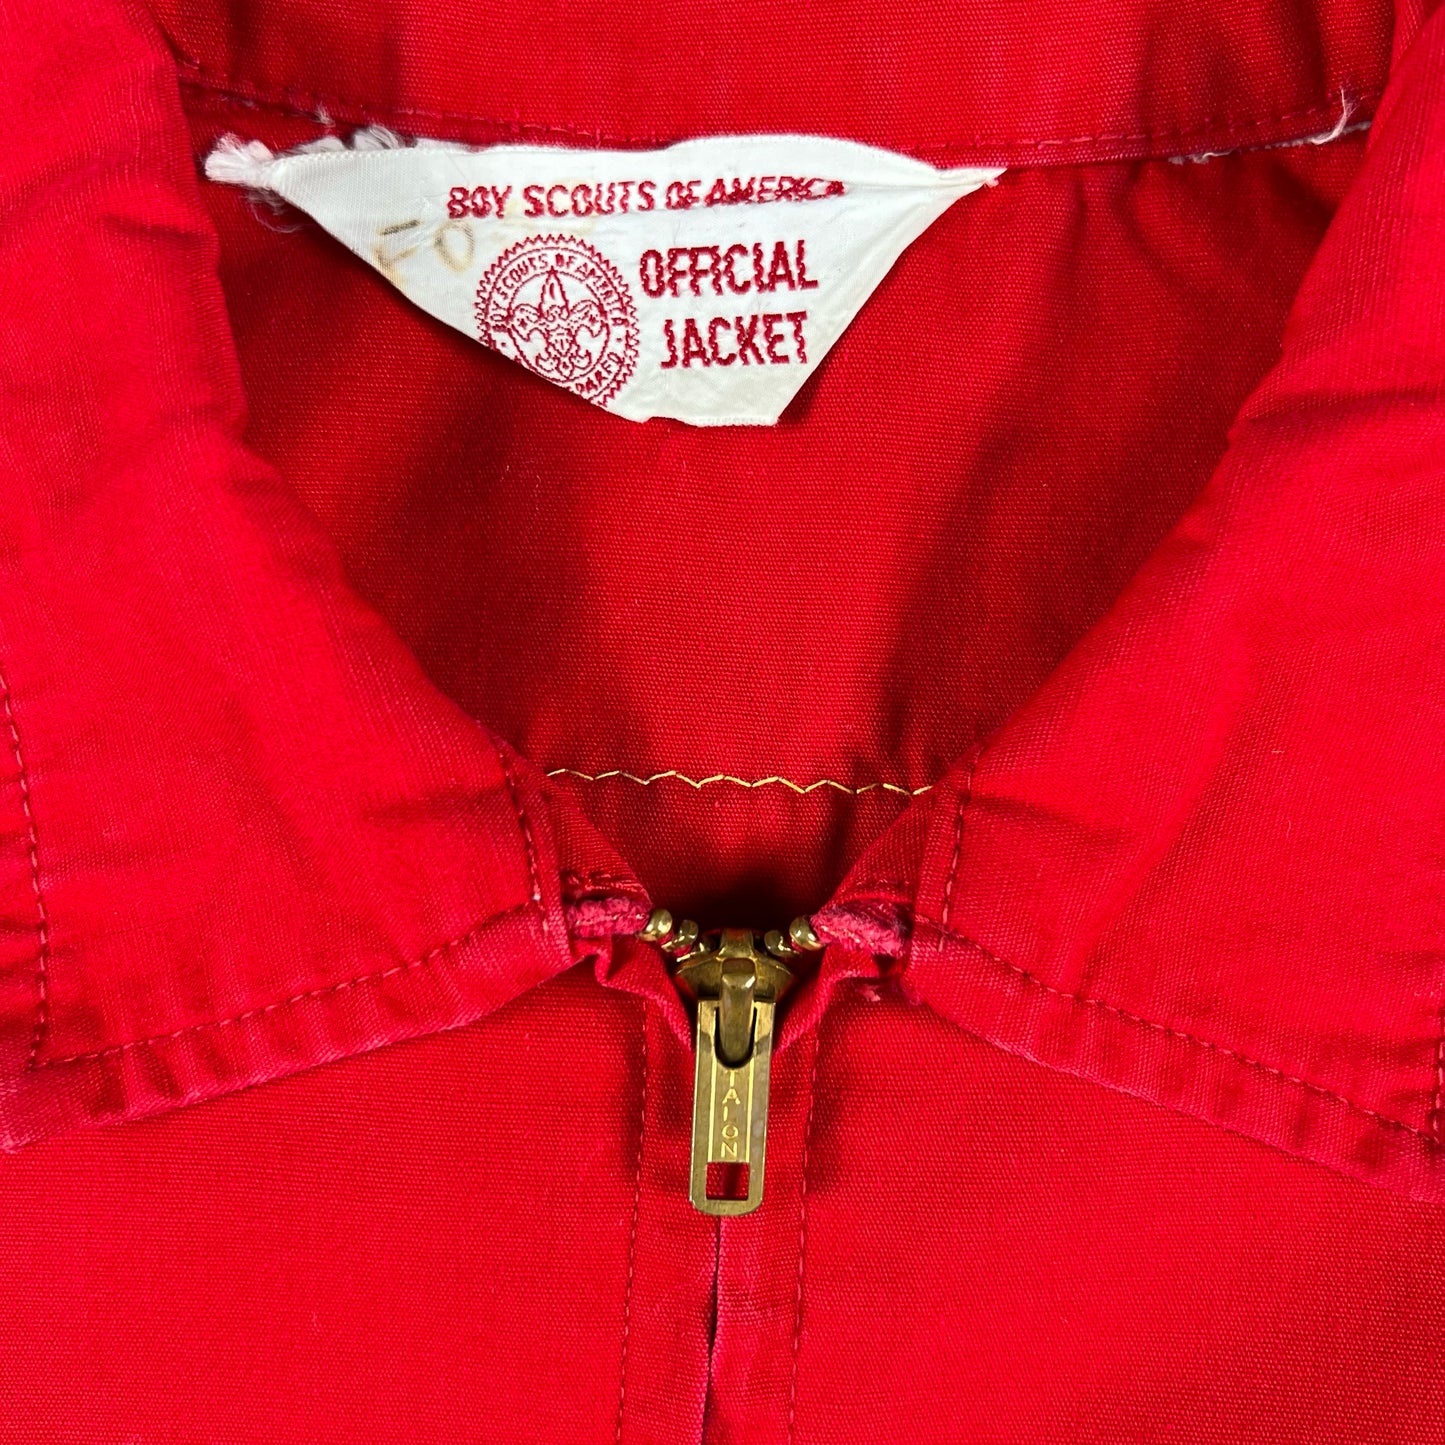 70s Patched Boxy BSA Jacket- M